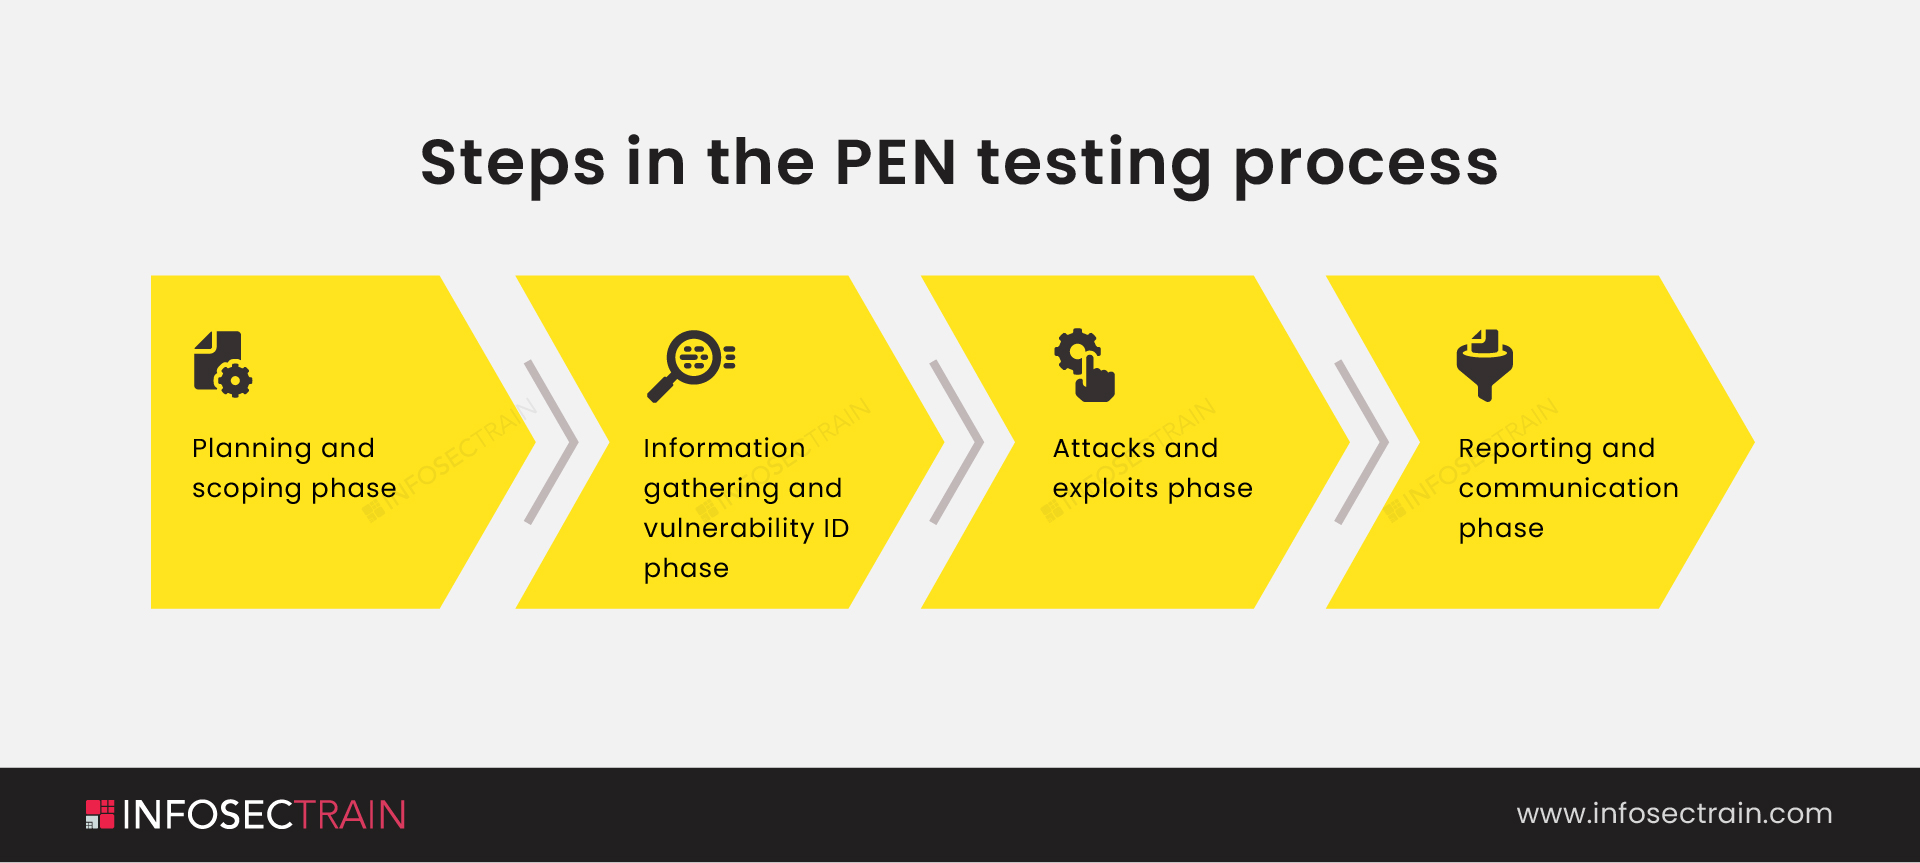 Steps in the PEN testing process